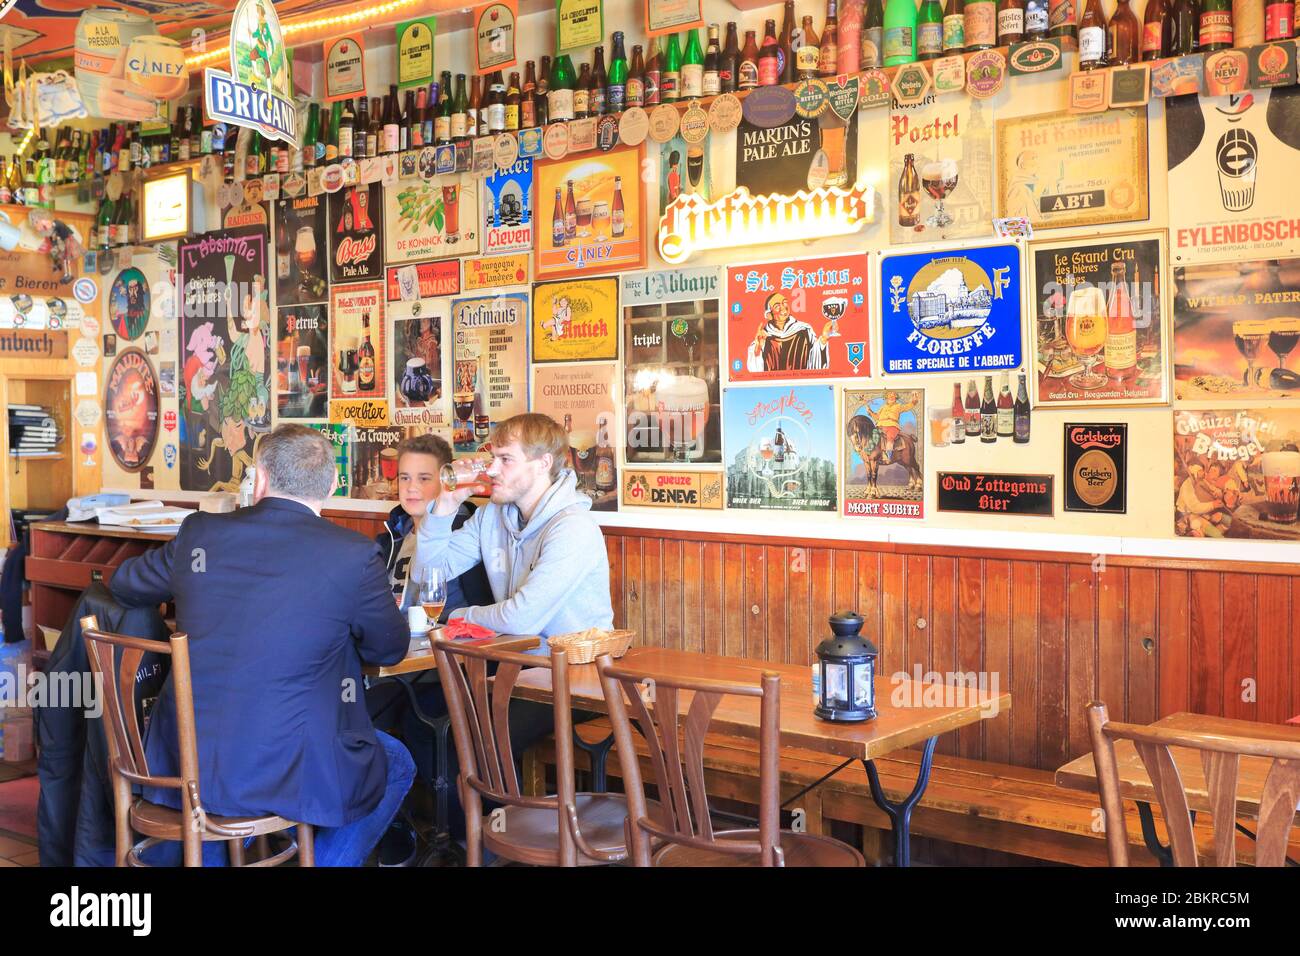 France, Loiret, Olivet, beer bar L'Absinthe offers 270 beers from around the world Stock Photo